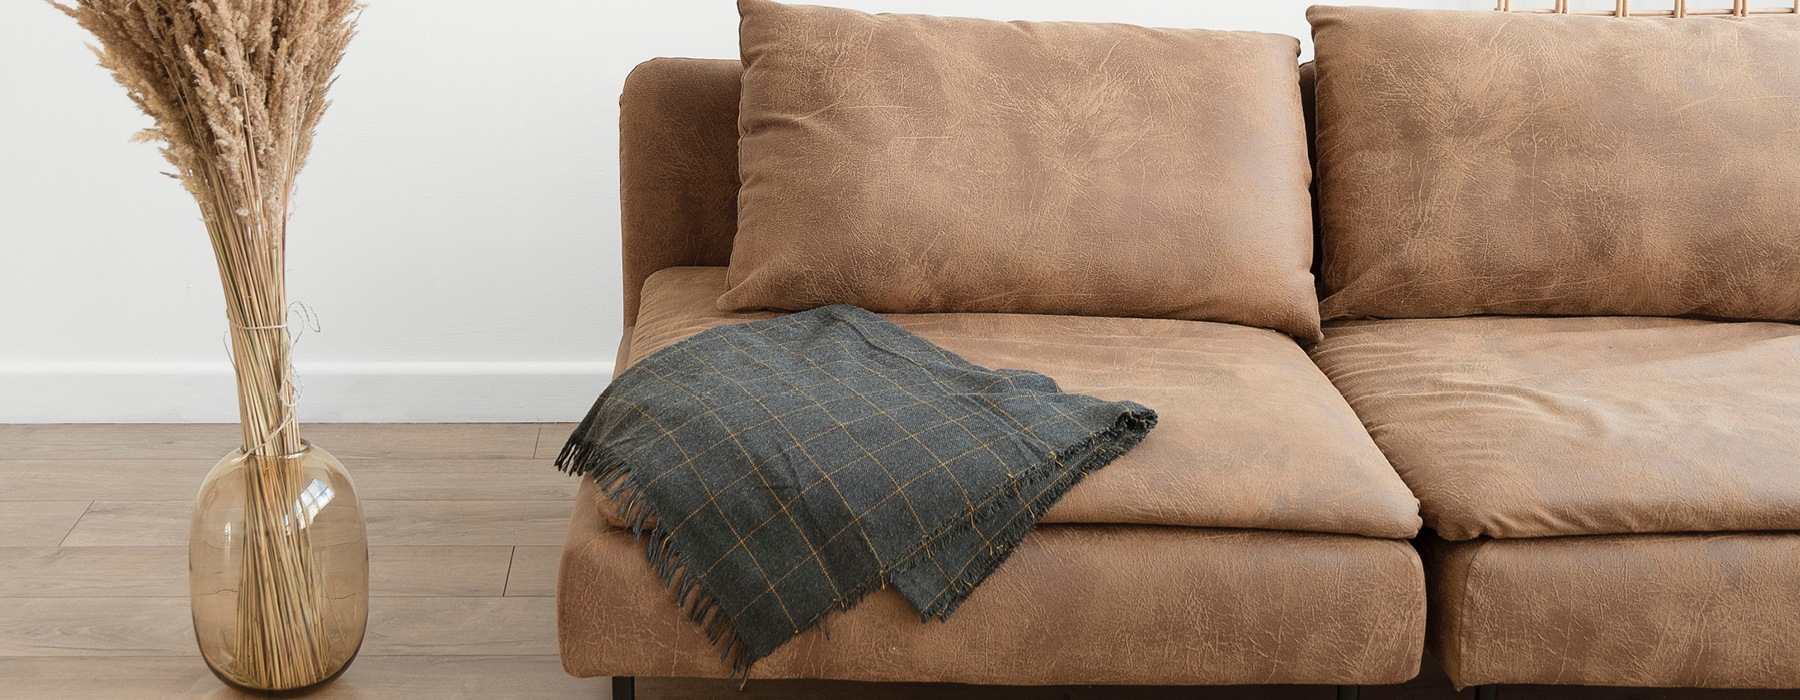 Brown sofa with a dark blanket in a spacious, well-lit room